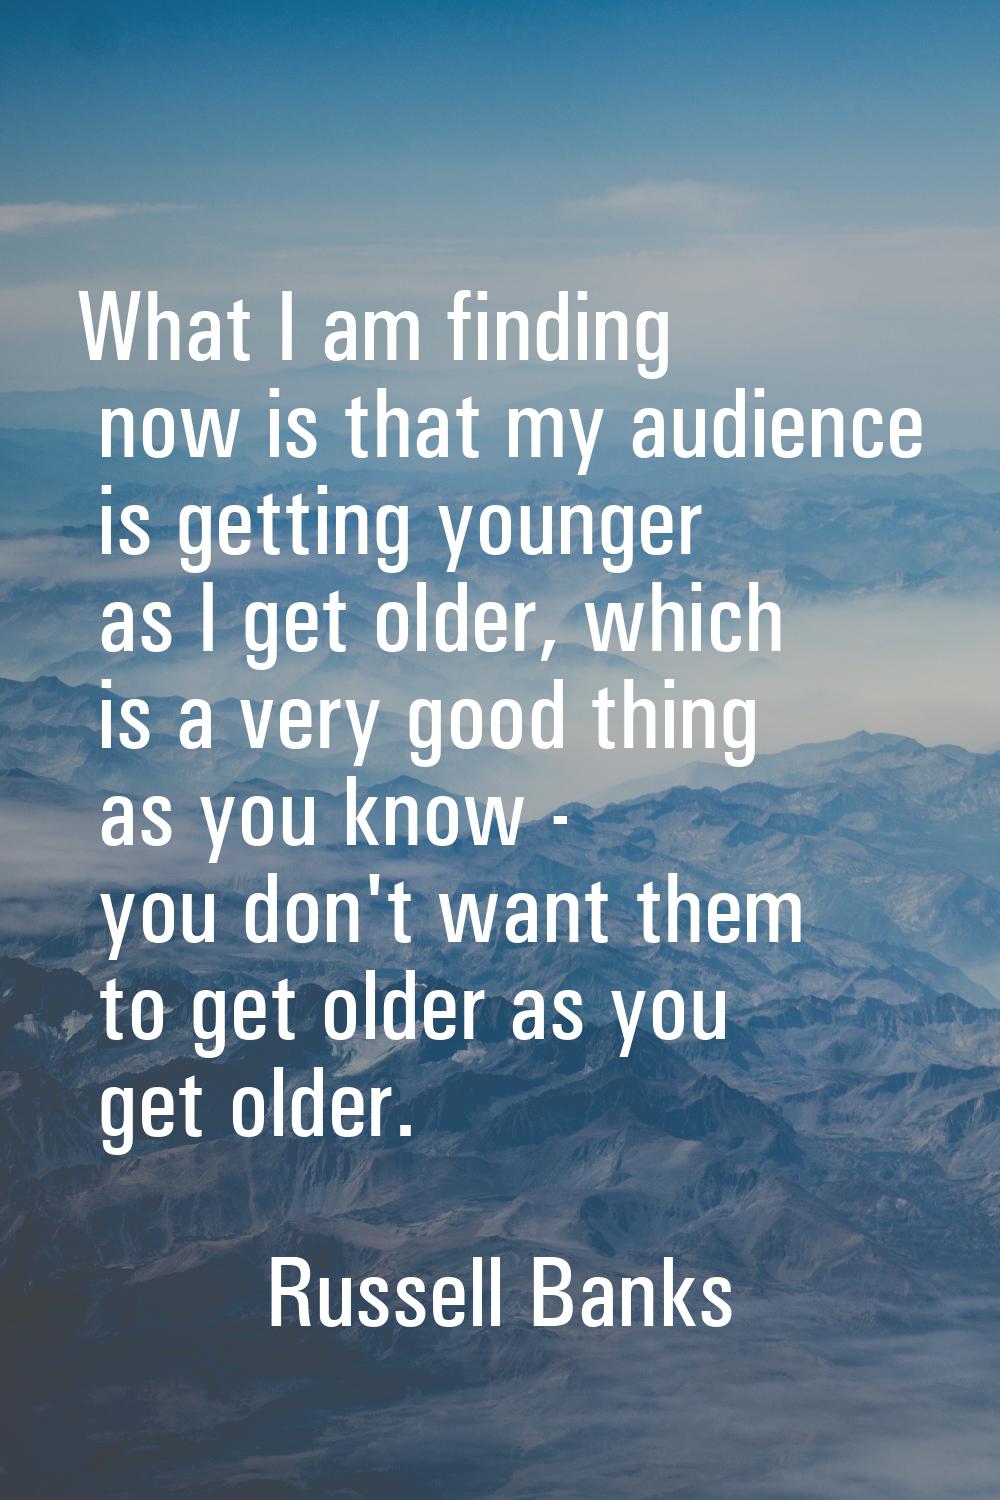 What I am finding now is that my audience is getting younger as I get older, which is a very good t